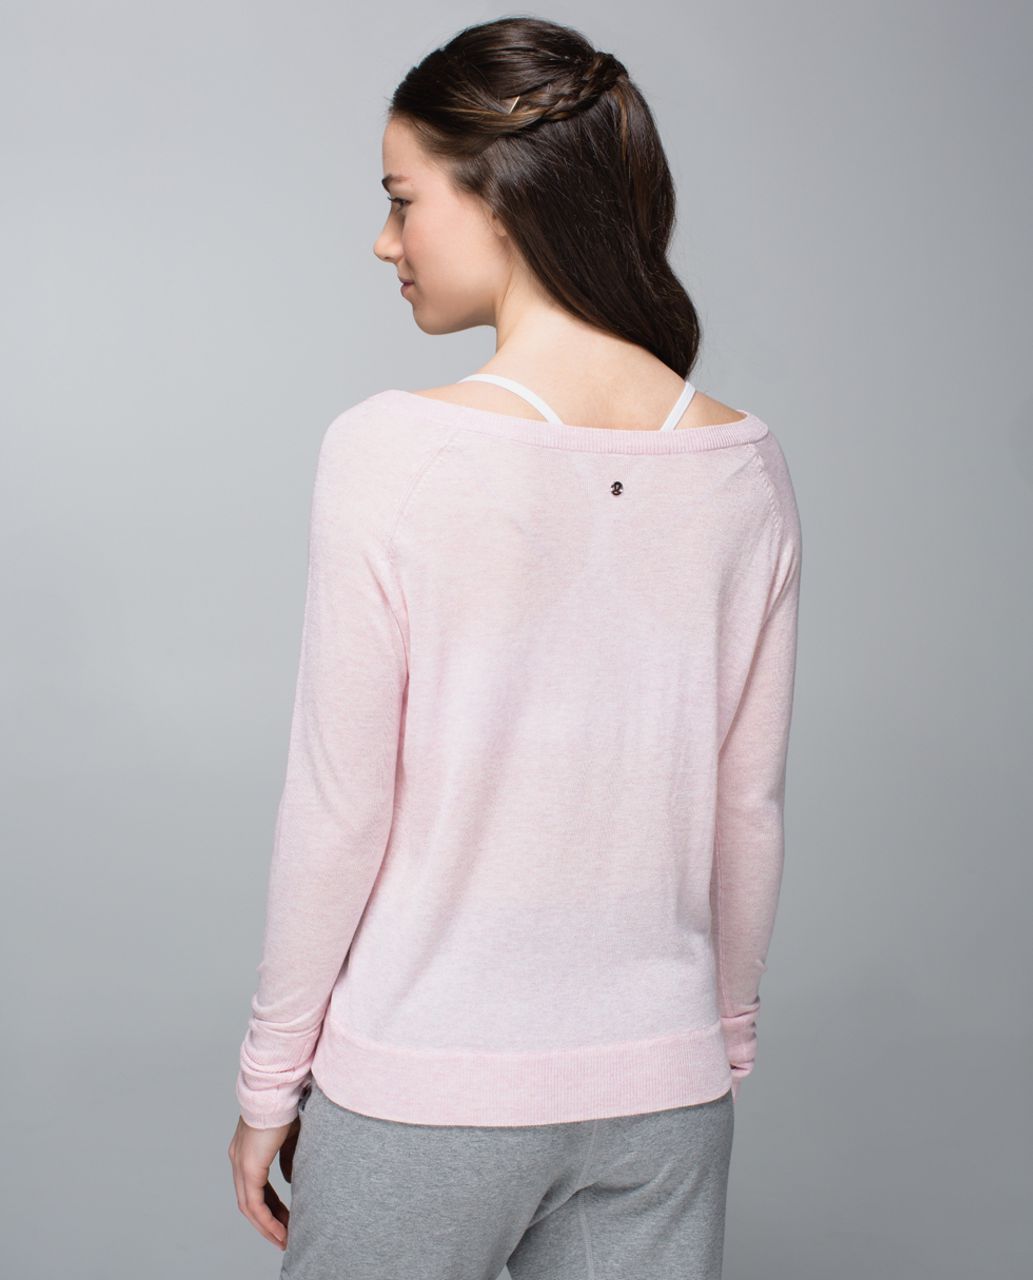 Lululemon Chai Time Pullover II - Heathered Barely Pink